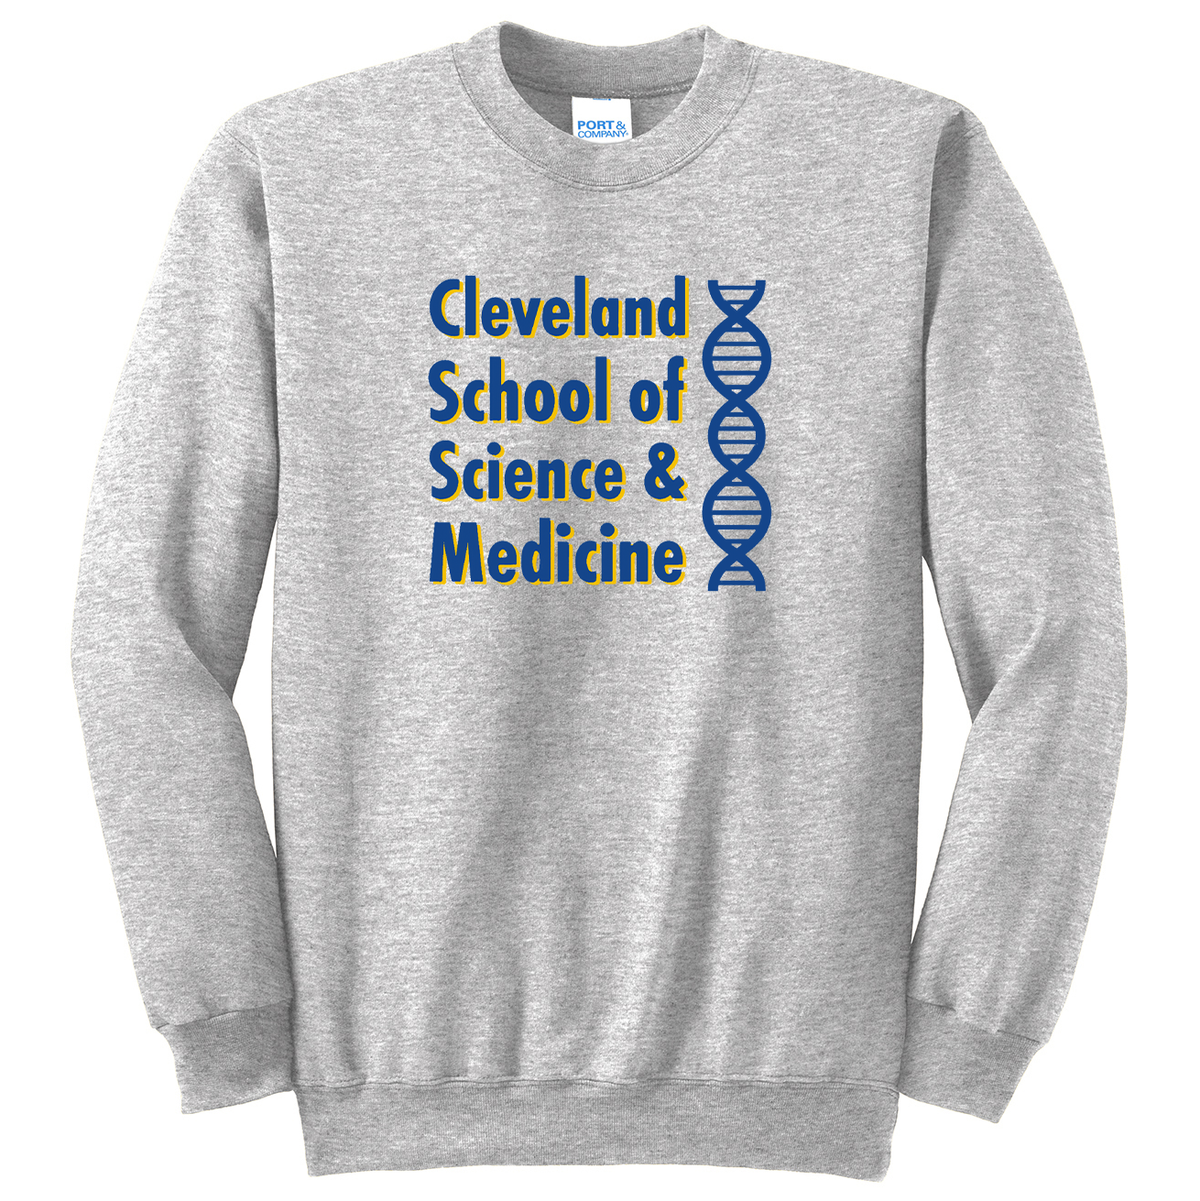 Cleveland School of Science and Medicine Crew Neck Sweater